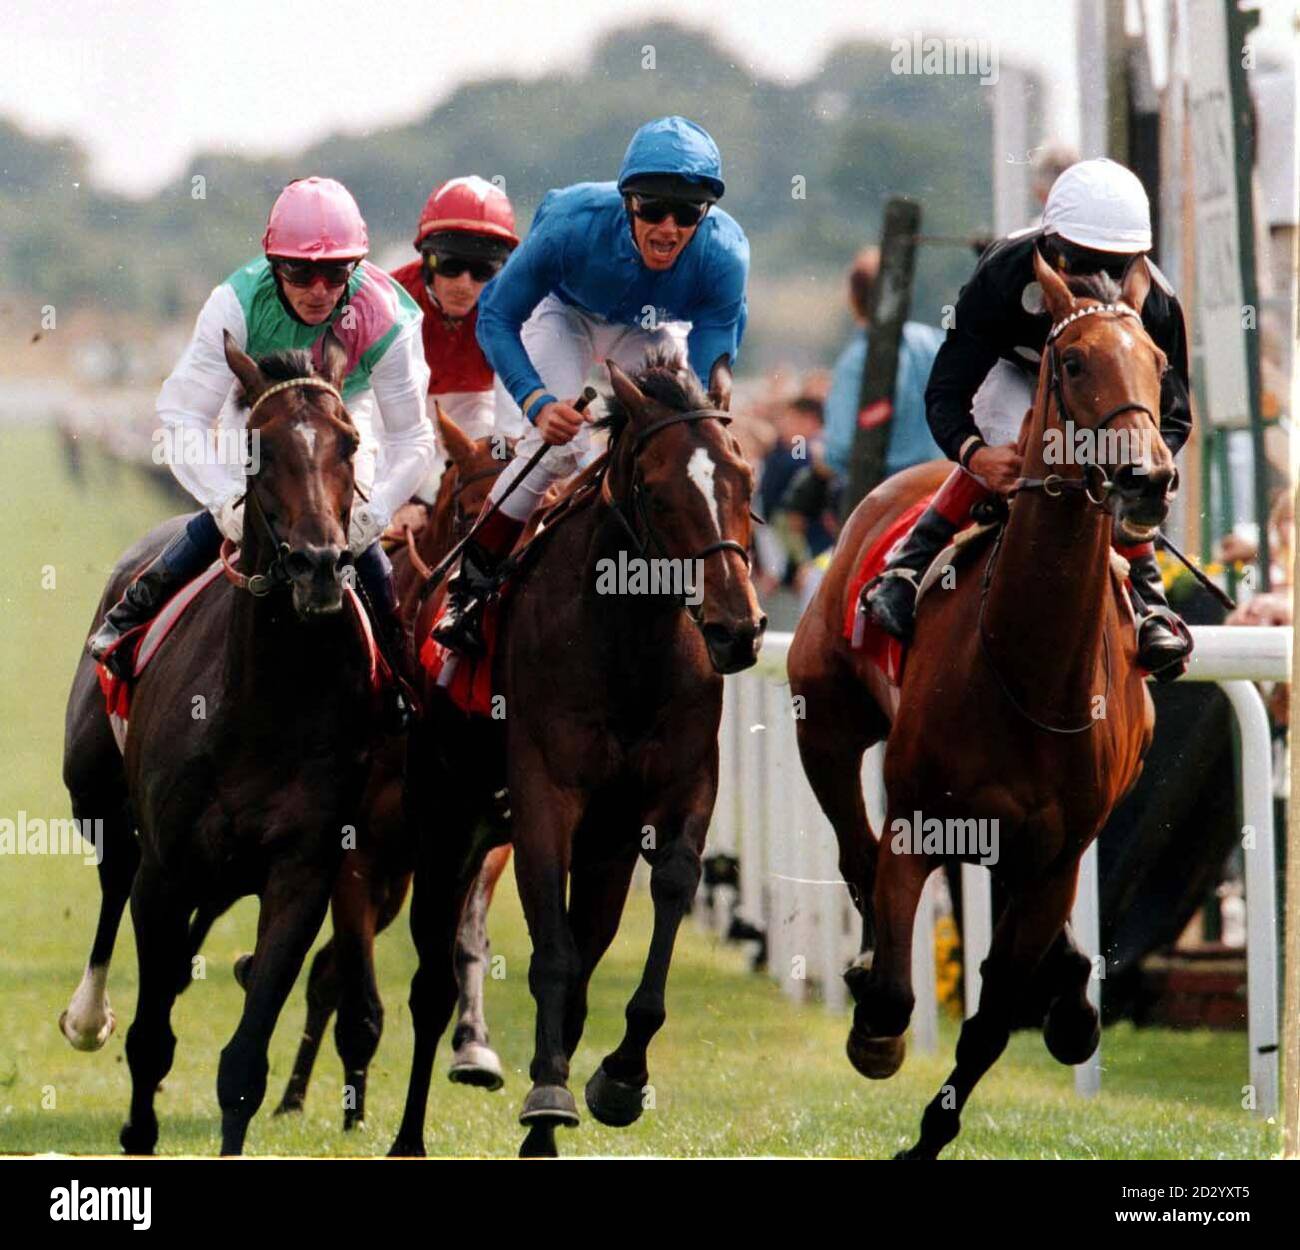 Frankie Dettori riding Faithful Son rises from the saddle as he thinks he's won the Juddmonte International Stakes at York, only to be piped at the post by a determined Pat Eddery riding One So Wonderful  (right) today (Tuesday). Photo by Charles Knight. Stock Photo